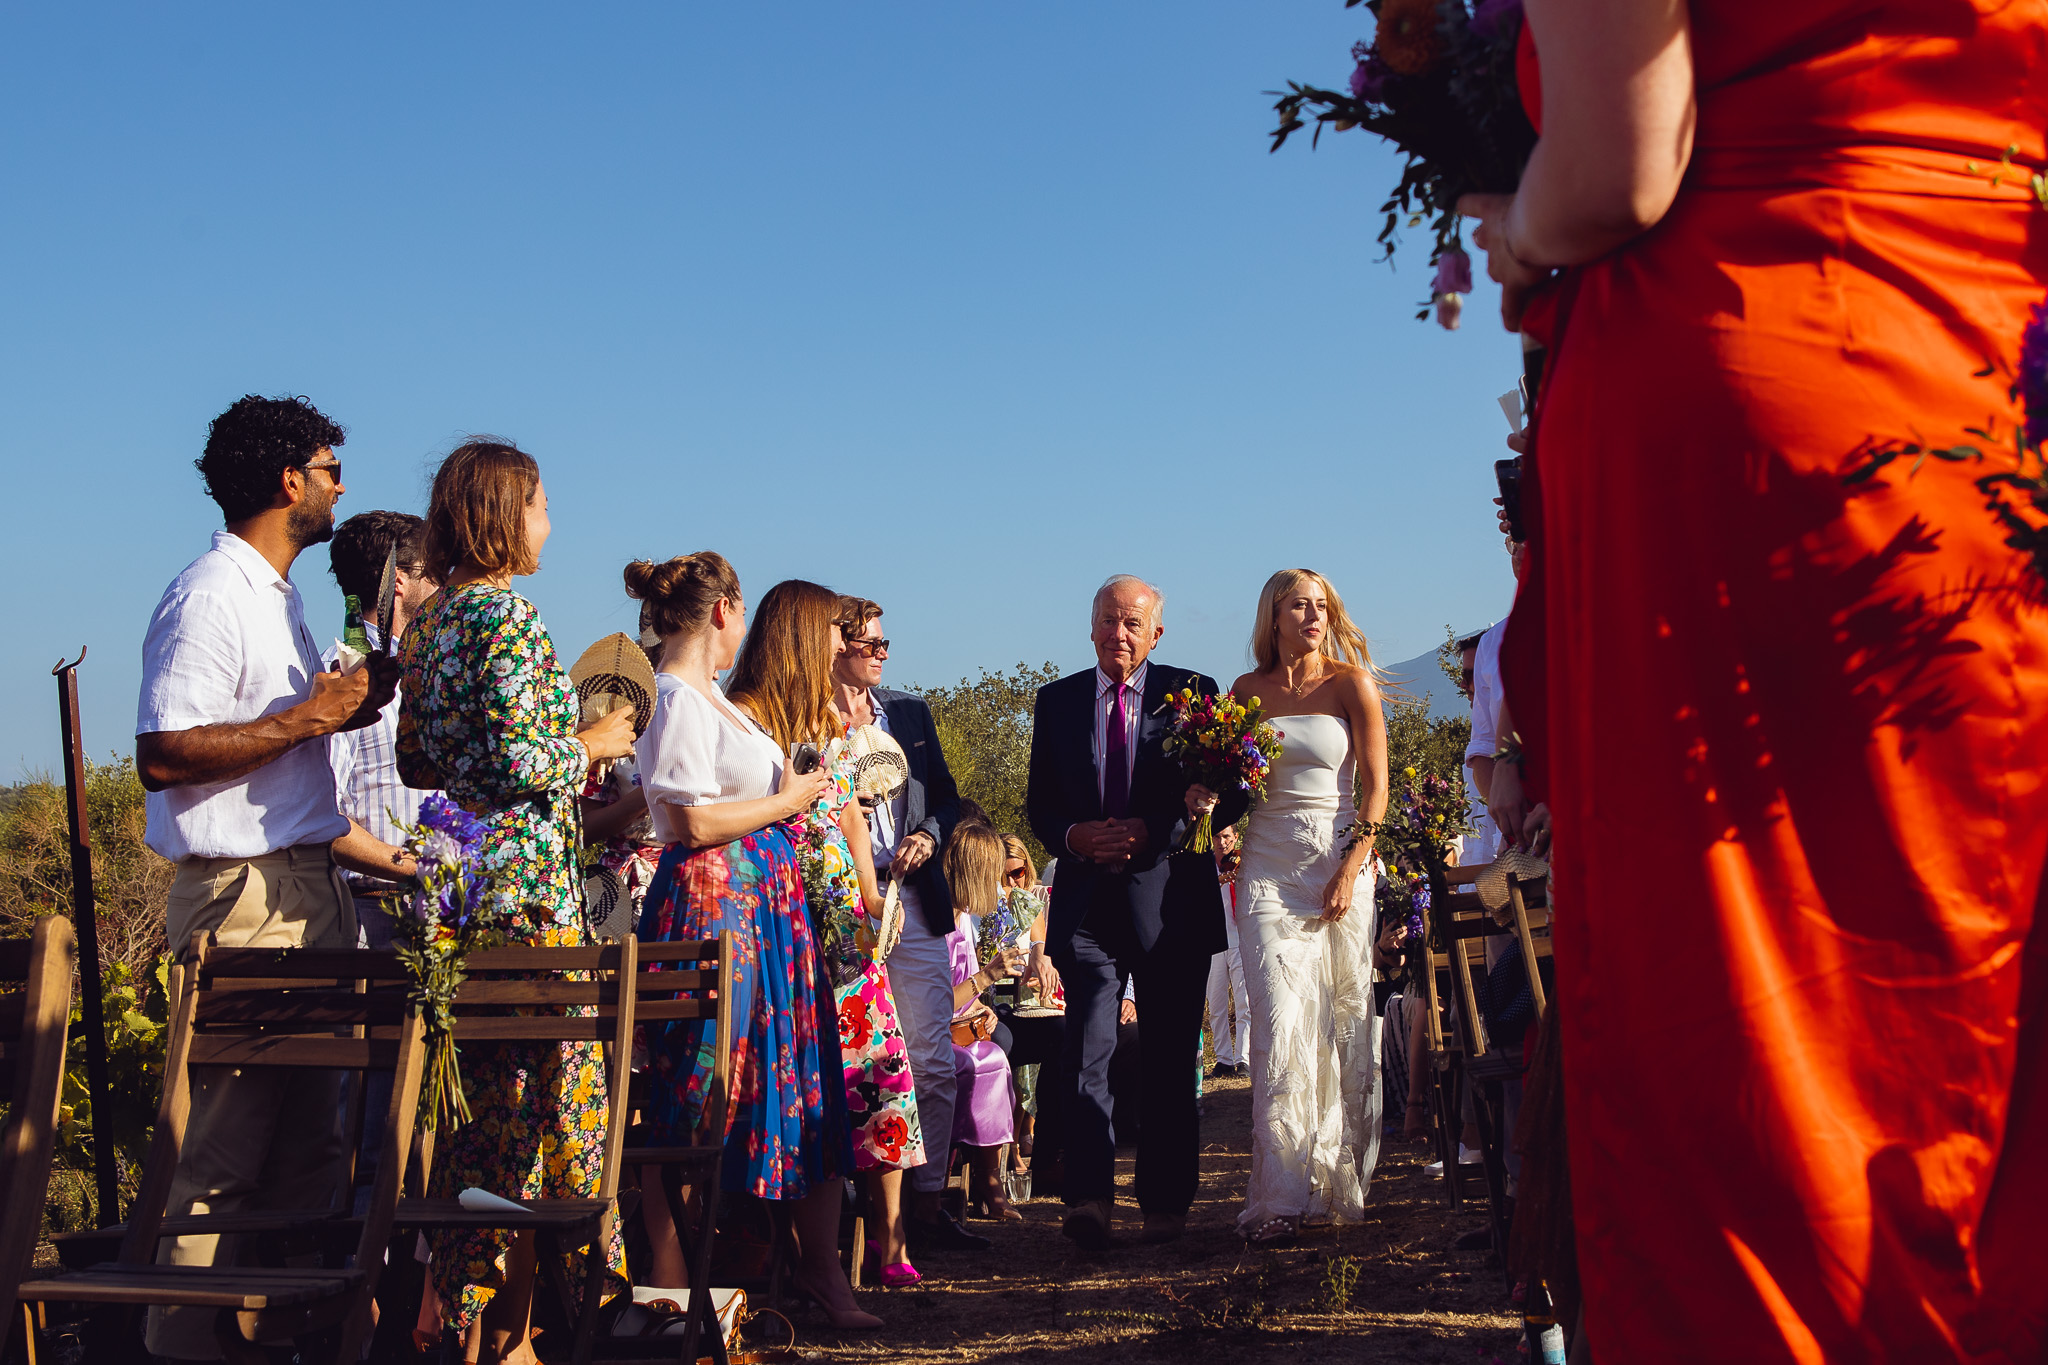 Guests stand whilst bride walks down aisle with her dad at a wedding ceremony in Ambelonas Vineyard, Corfu